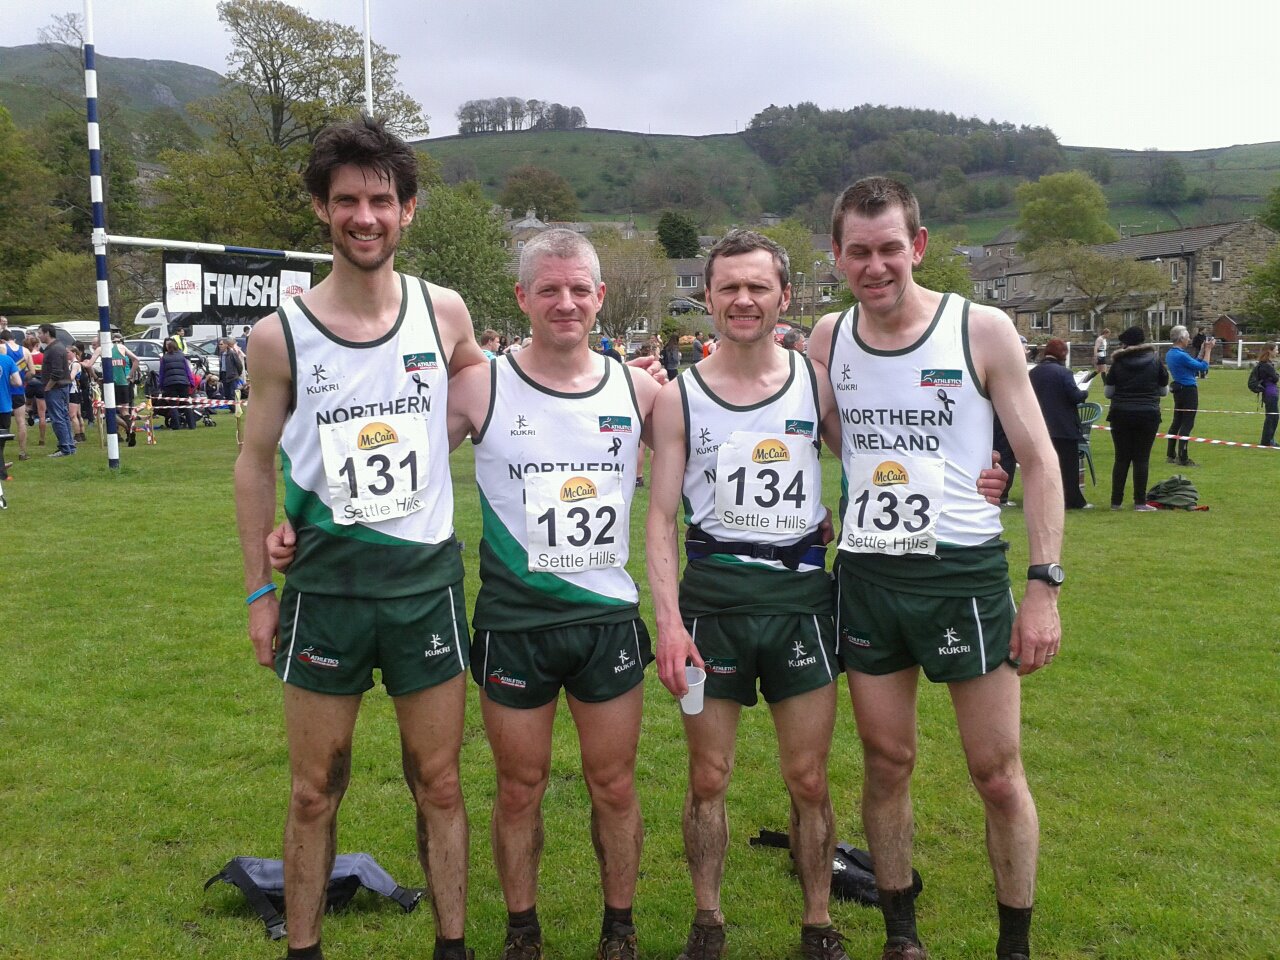 Mulholland, Logue, Bogle and McNeilly do NI proud at Inter County ...